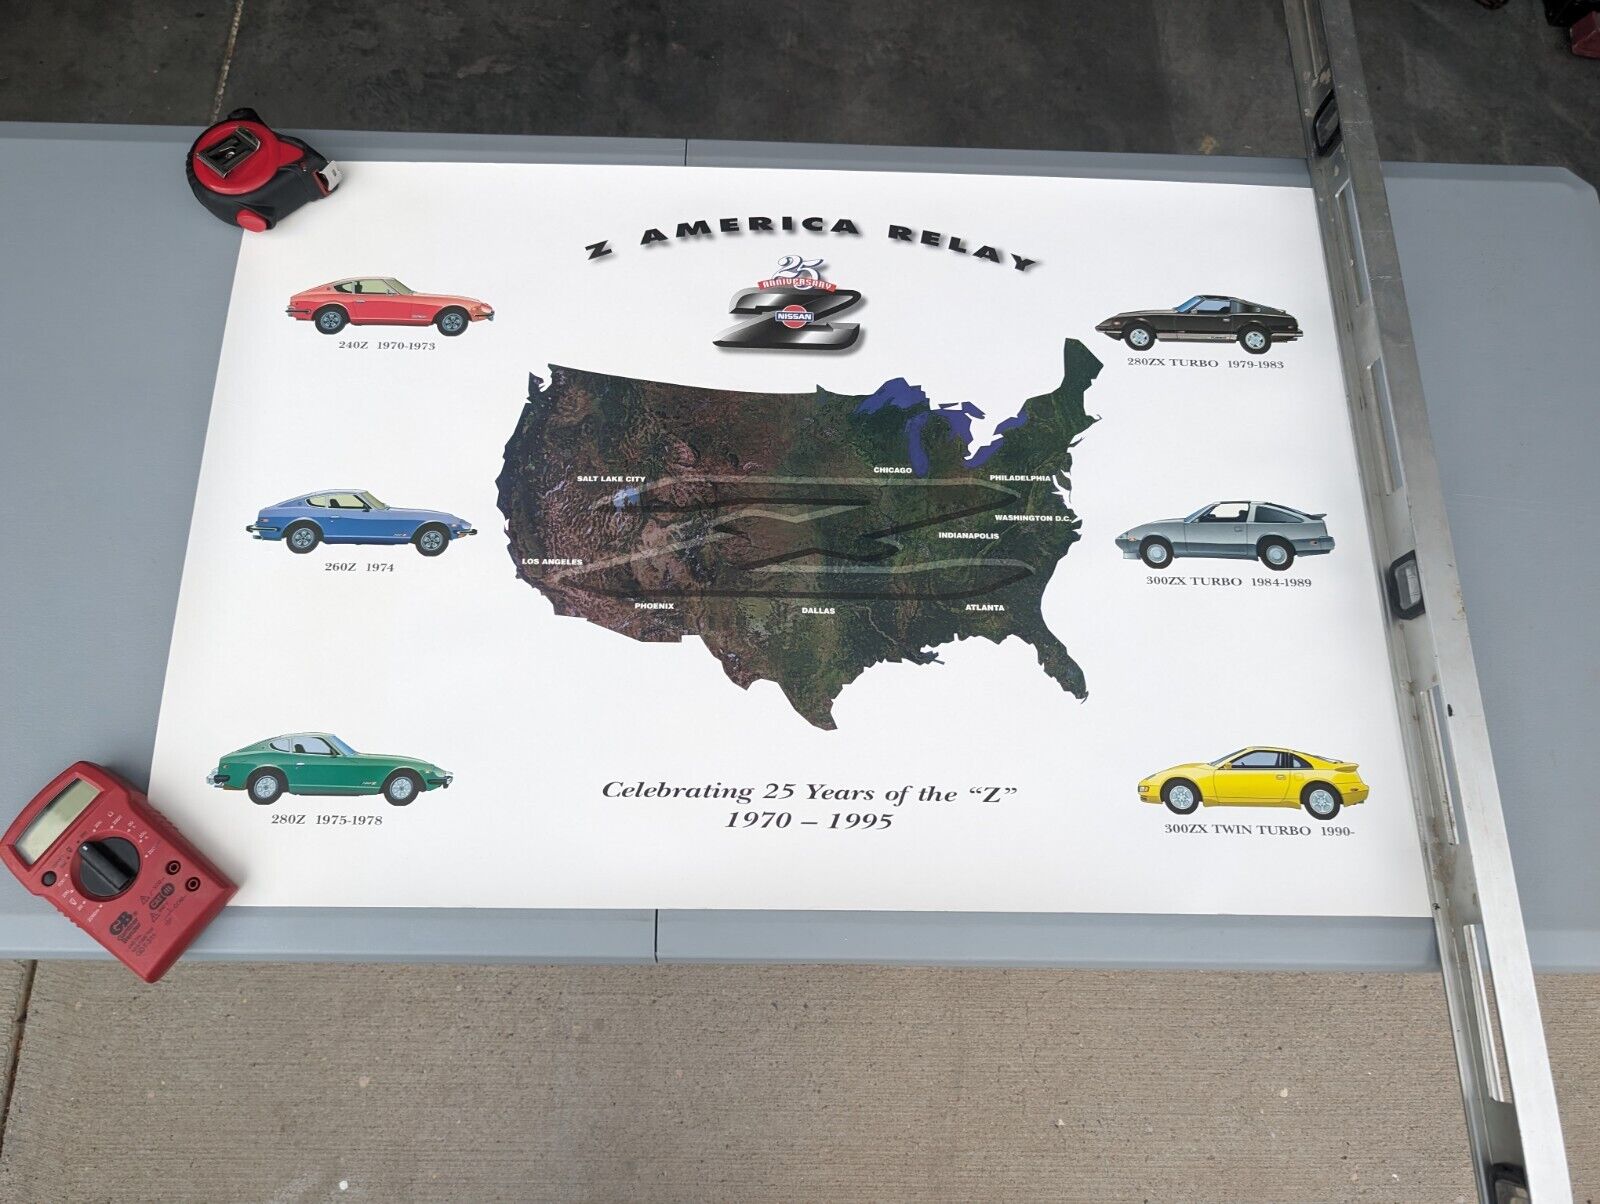 1995 Nissan Dealer Advertising Poster Sign 25 Years Of Z. Z America Relay 